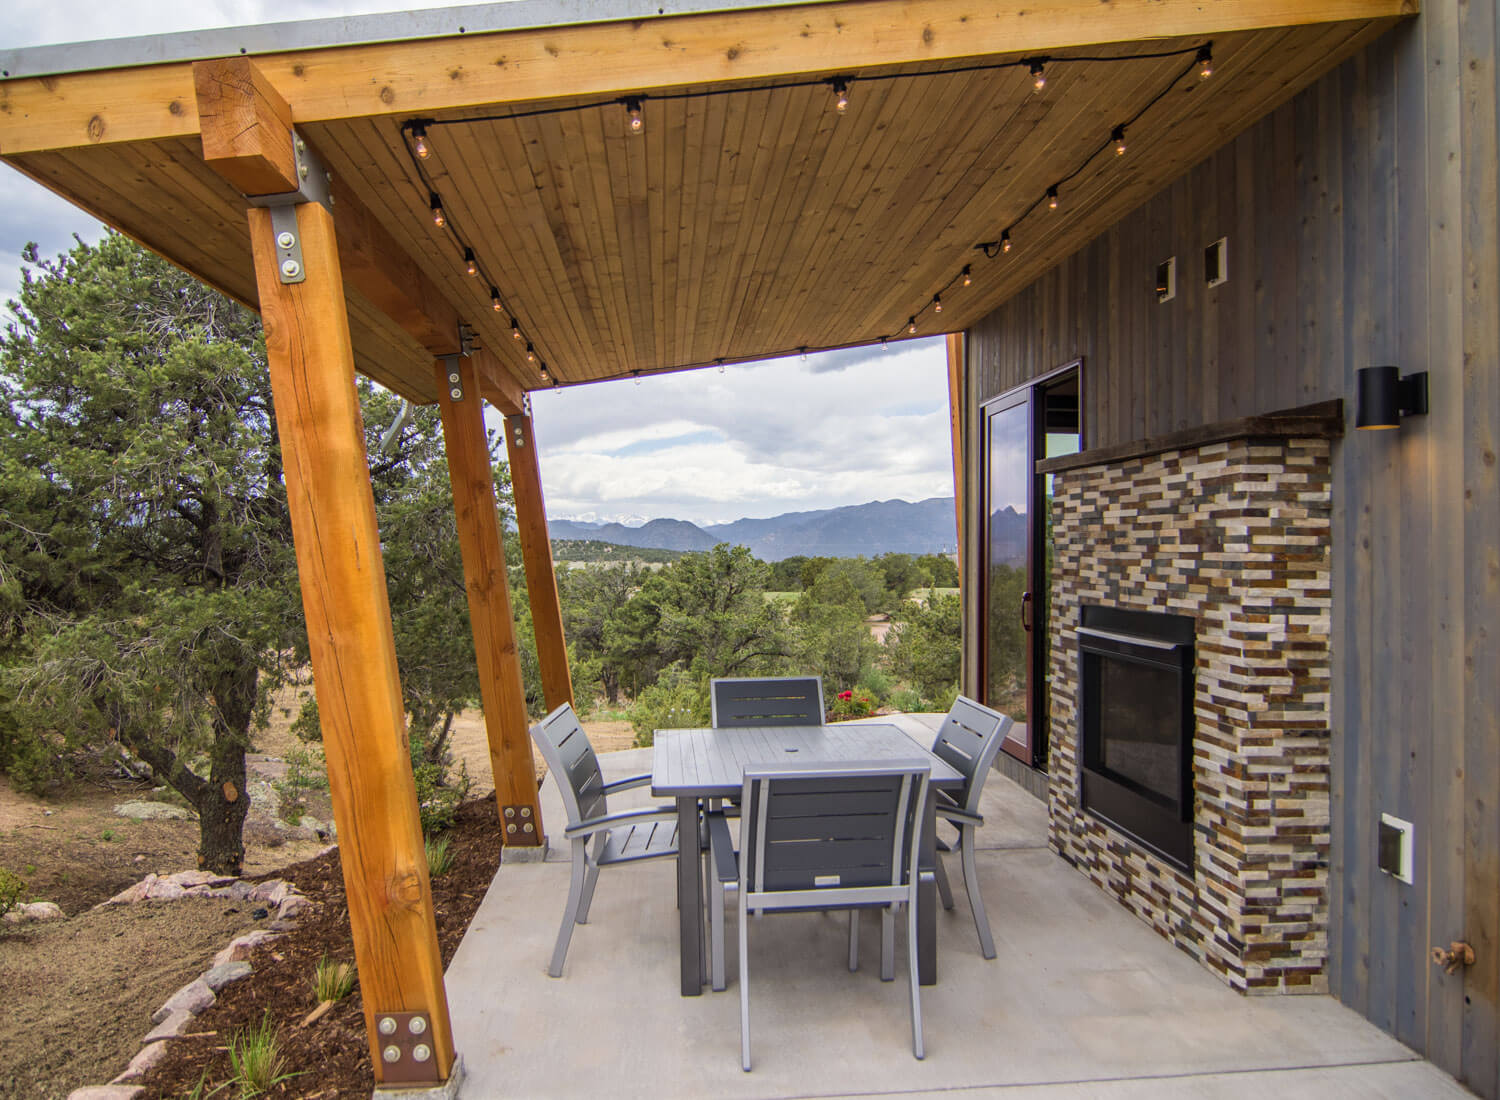 Patio and fireplace of cabin at Royal Gorge Cabins